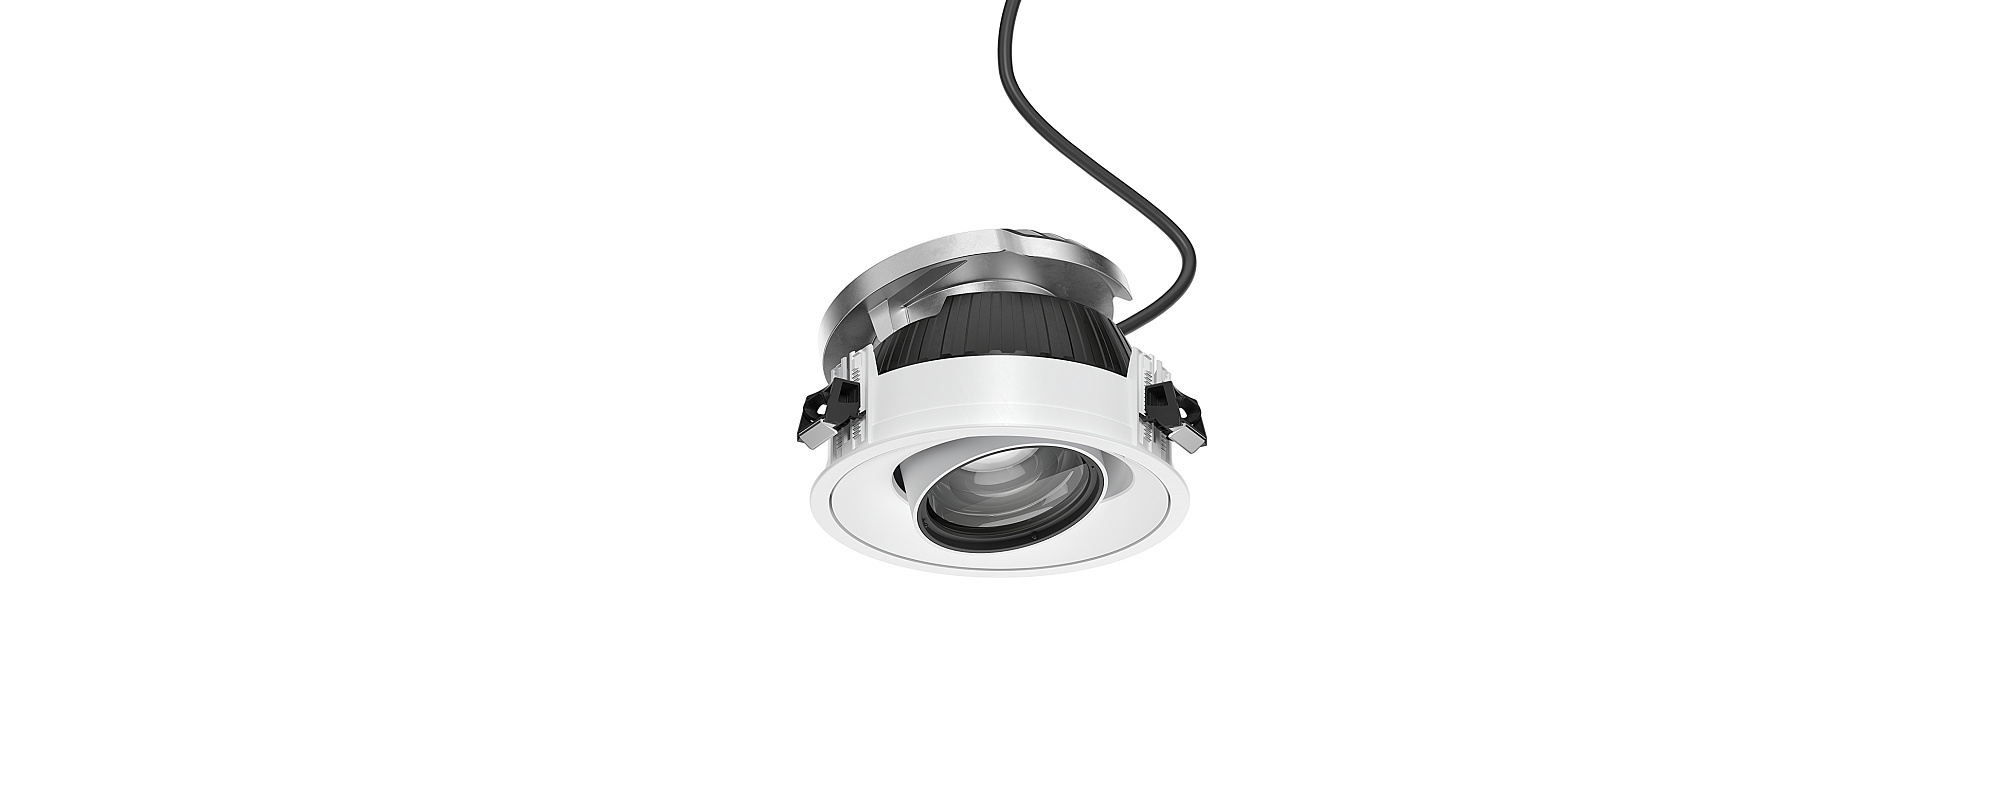 Quinta - Recessed spotlights, recessed floodlights and recessed wallwashers